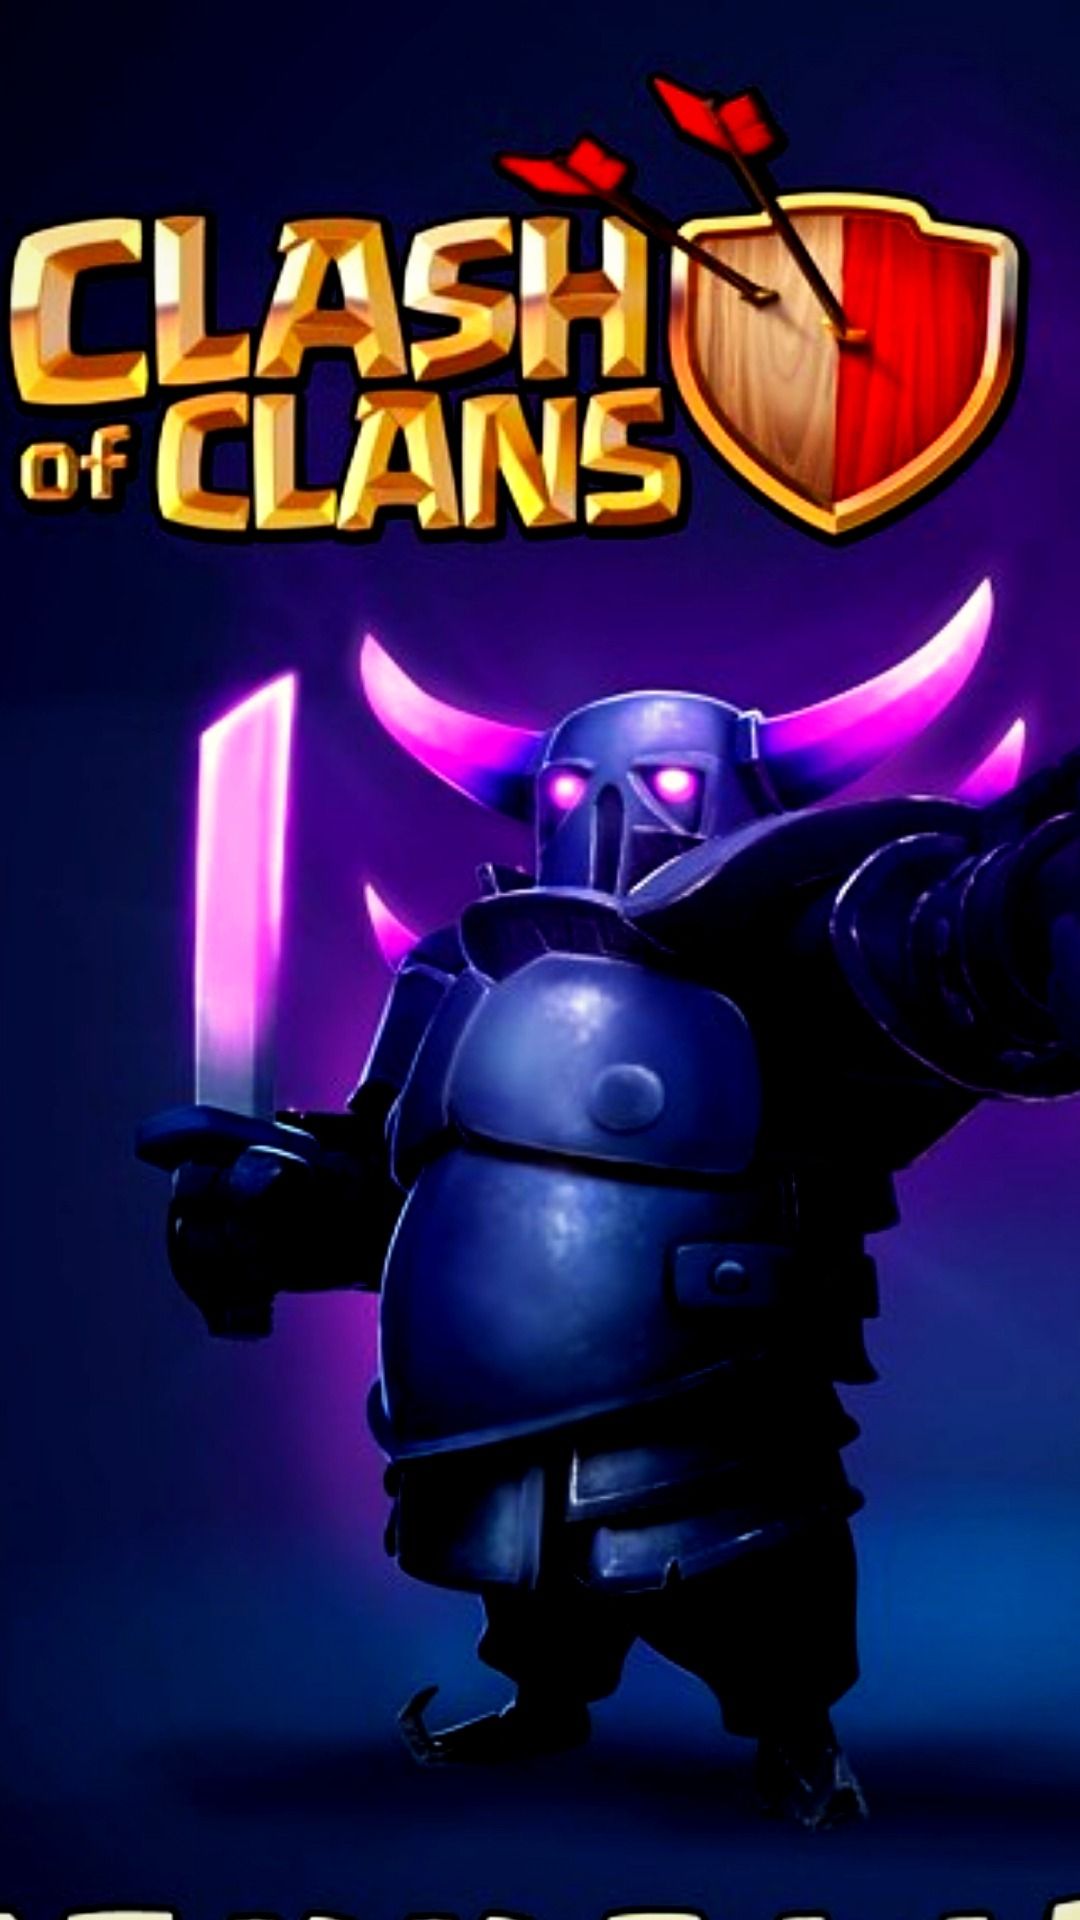 Clash Of Clans Wallpaper iPhone Free Download 2021